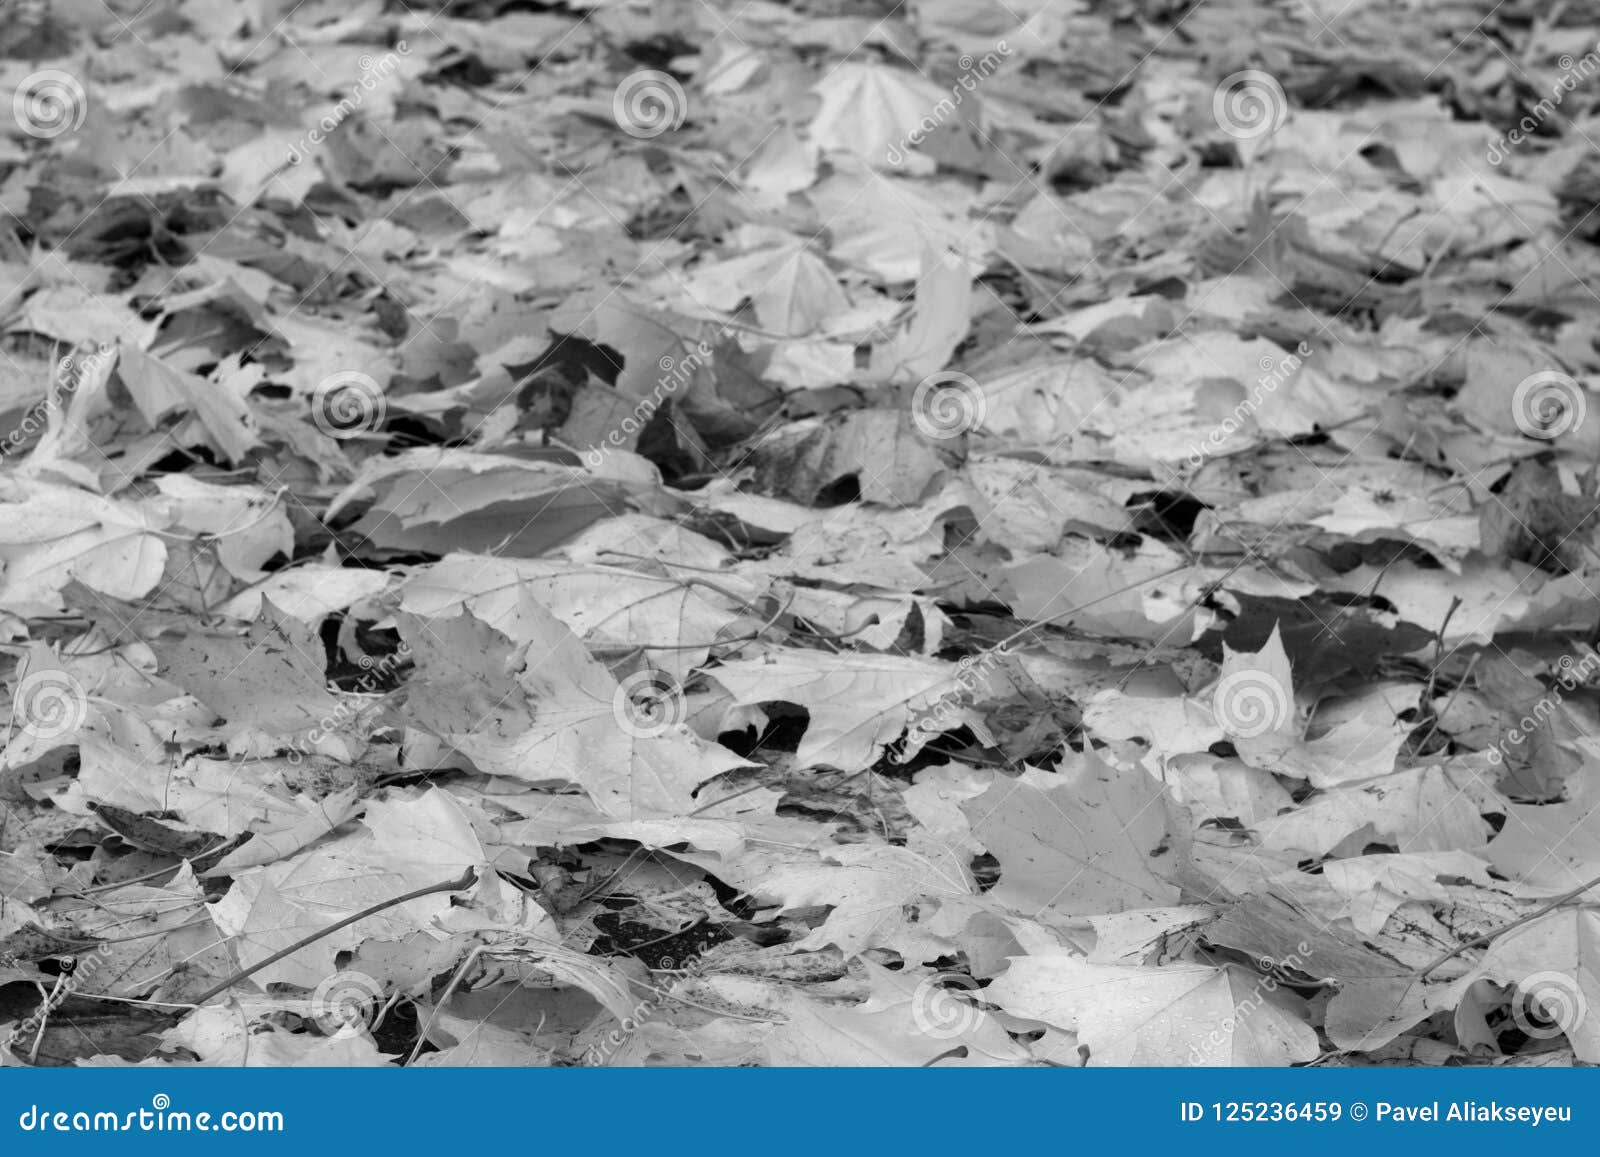 Pile of Maple Leaves in Black and White. Stock Image - Image of grey ...